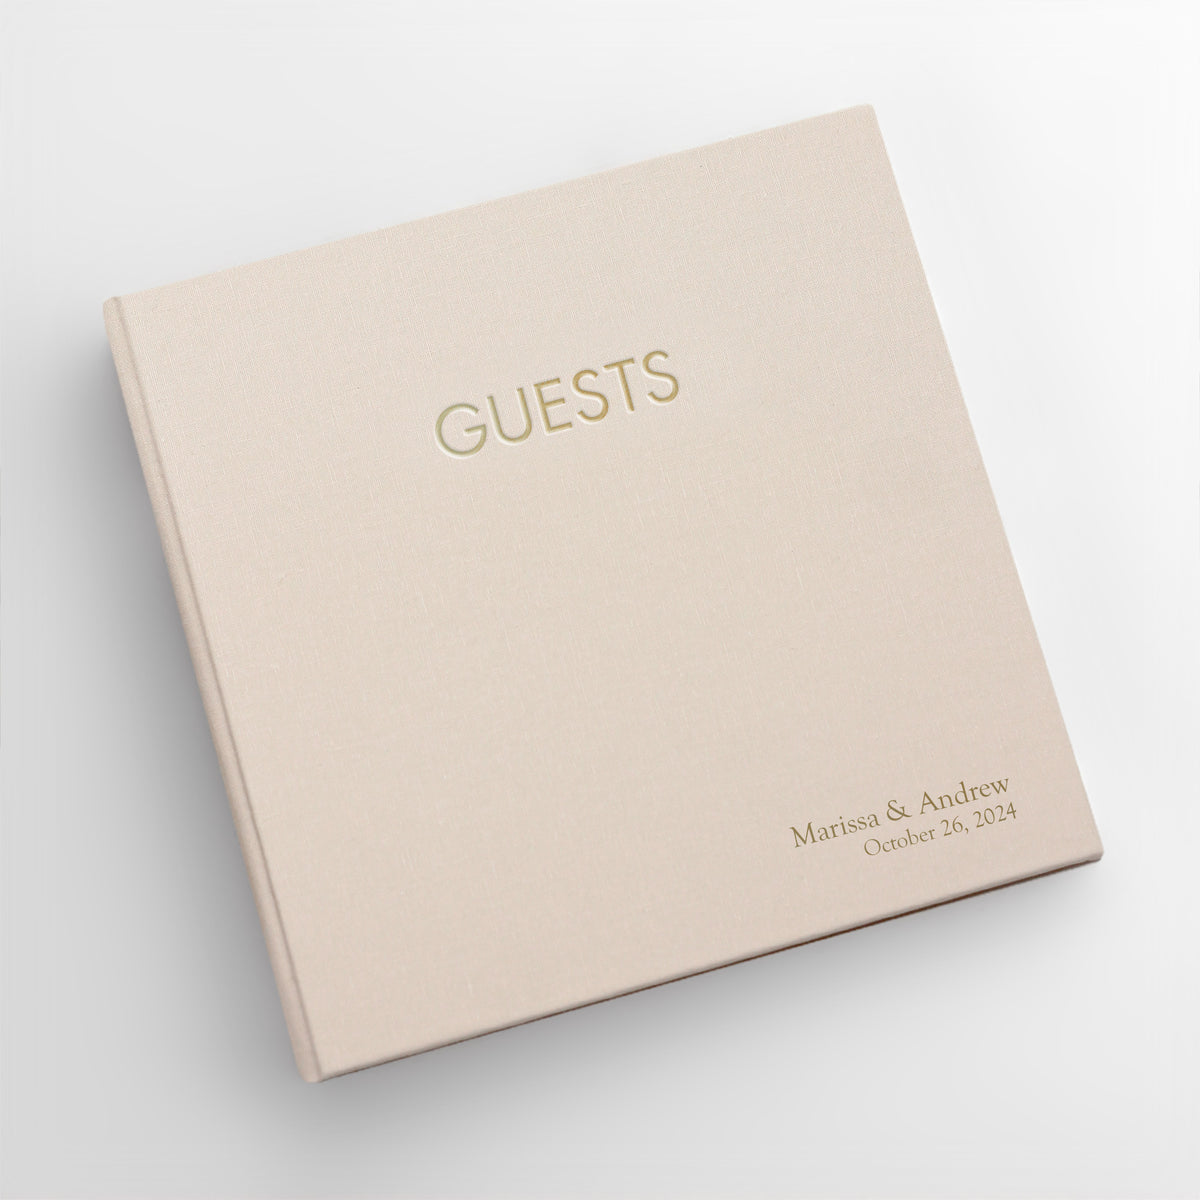 Event Guestbook Embossed with “Guests” | Cover: Ballet Pink Cotton | Available Personalized